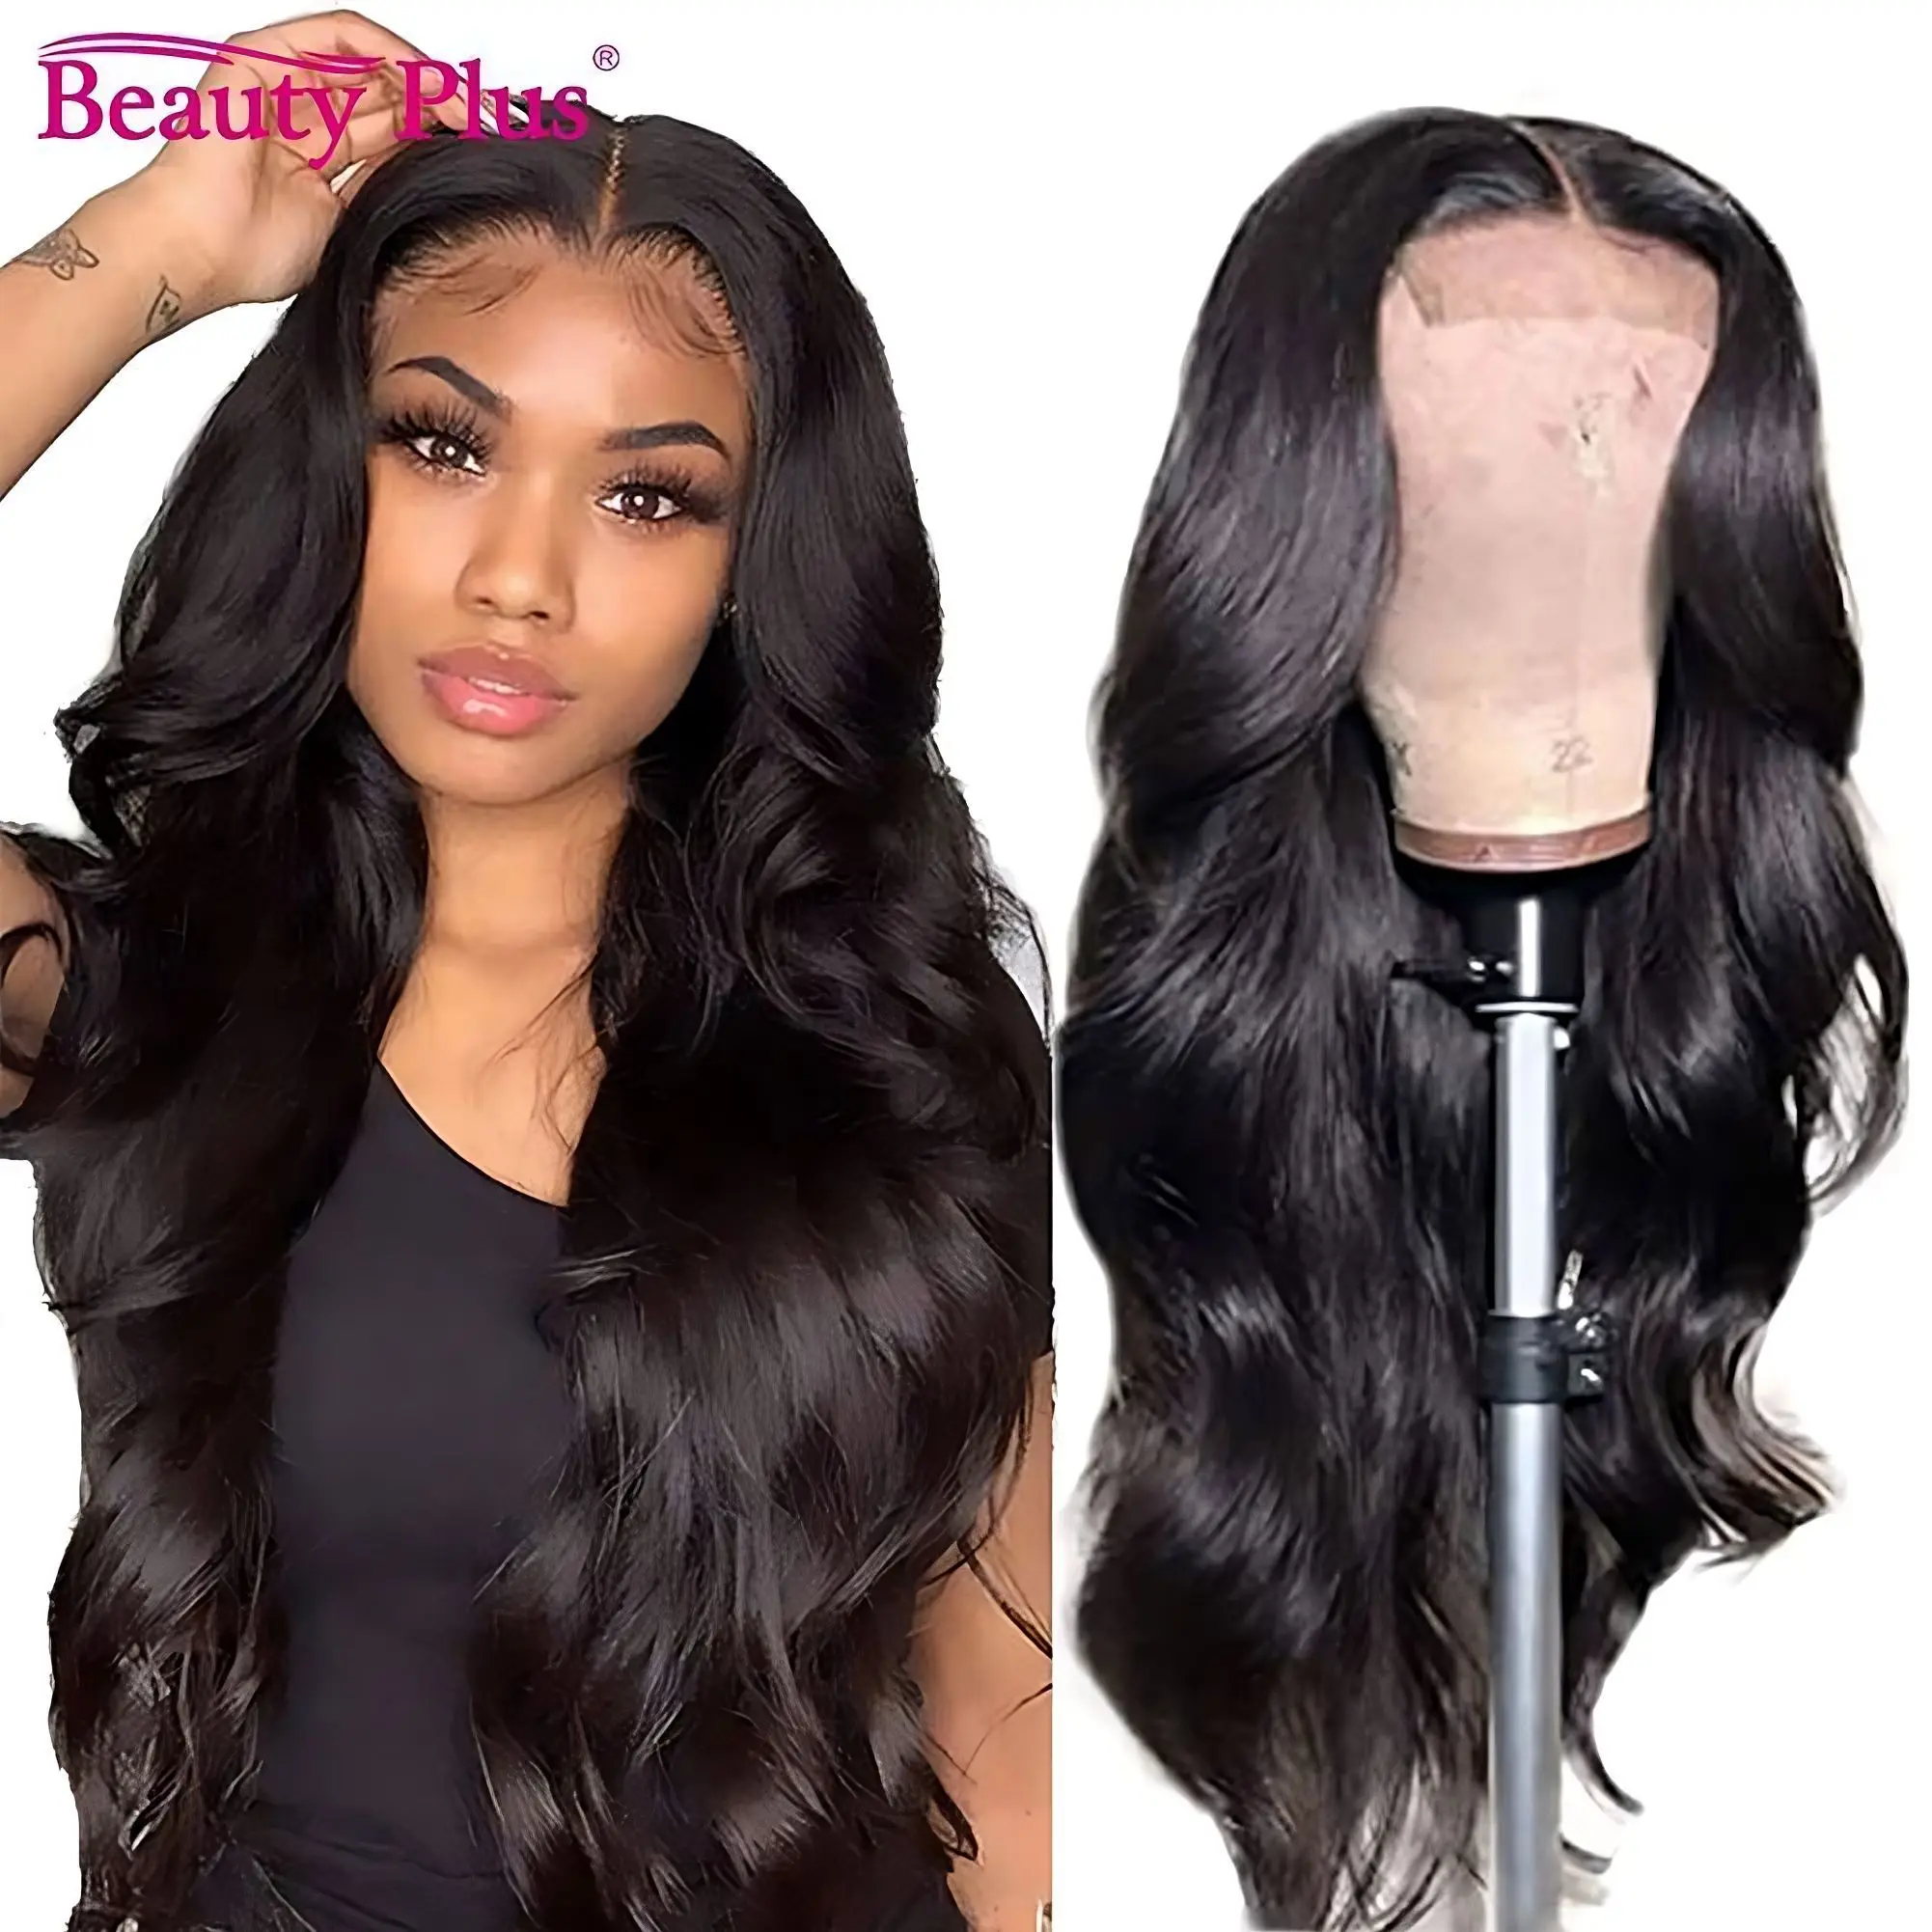 Body Wave 30 Inches 13x4 Front Human Hair Lace Frontal Wigs For Women Human Hair 4X4 Closure Brazilian Lace Wig 150 Density